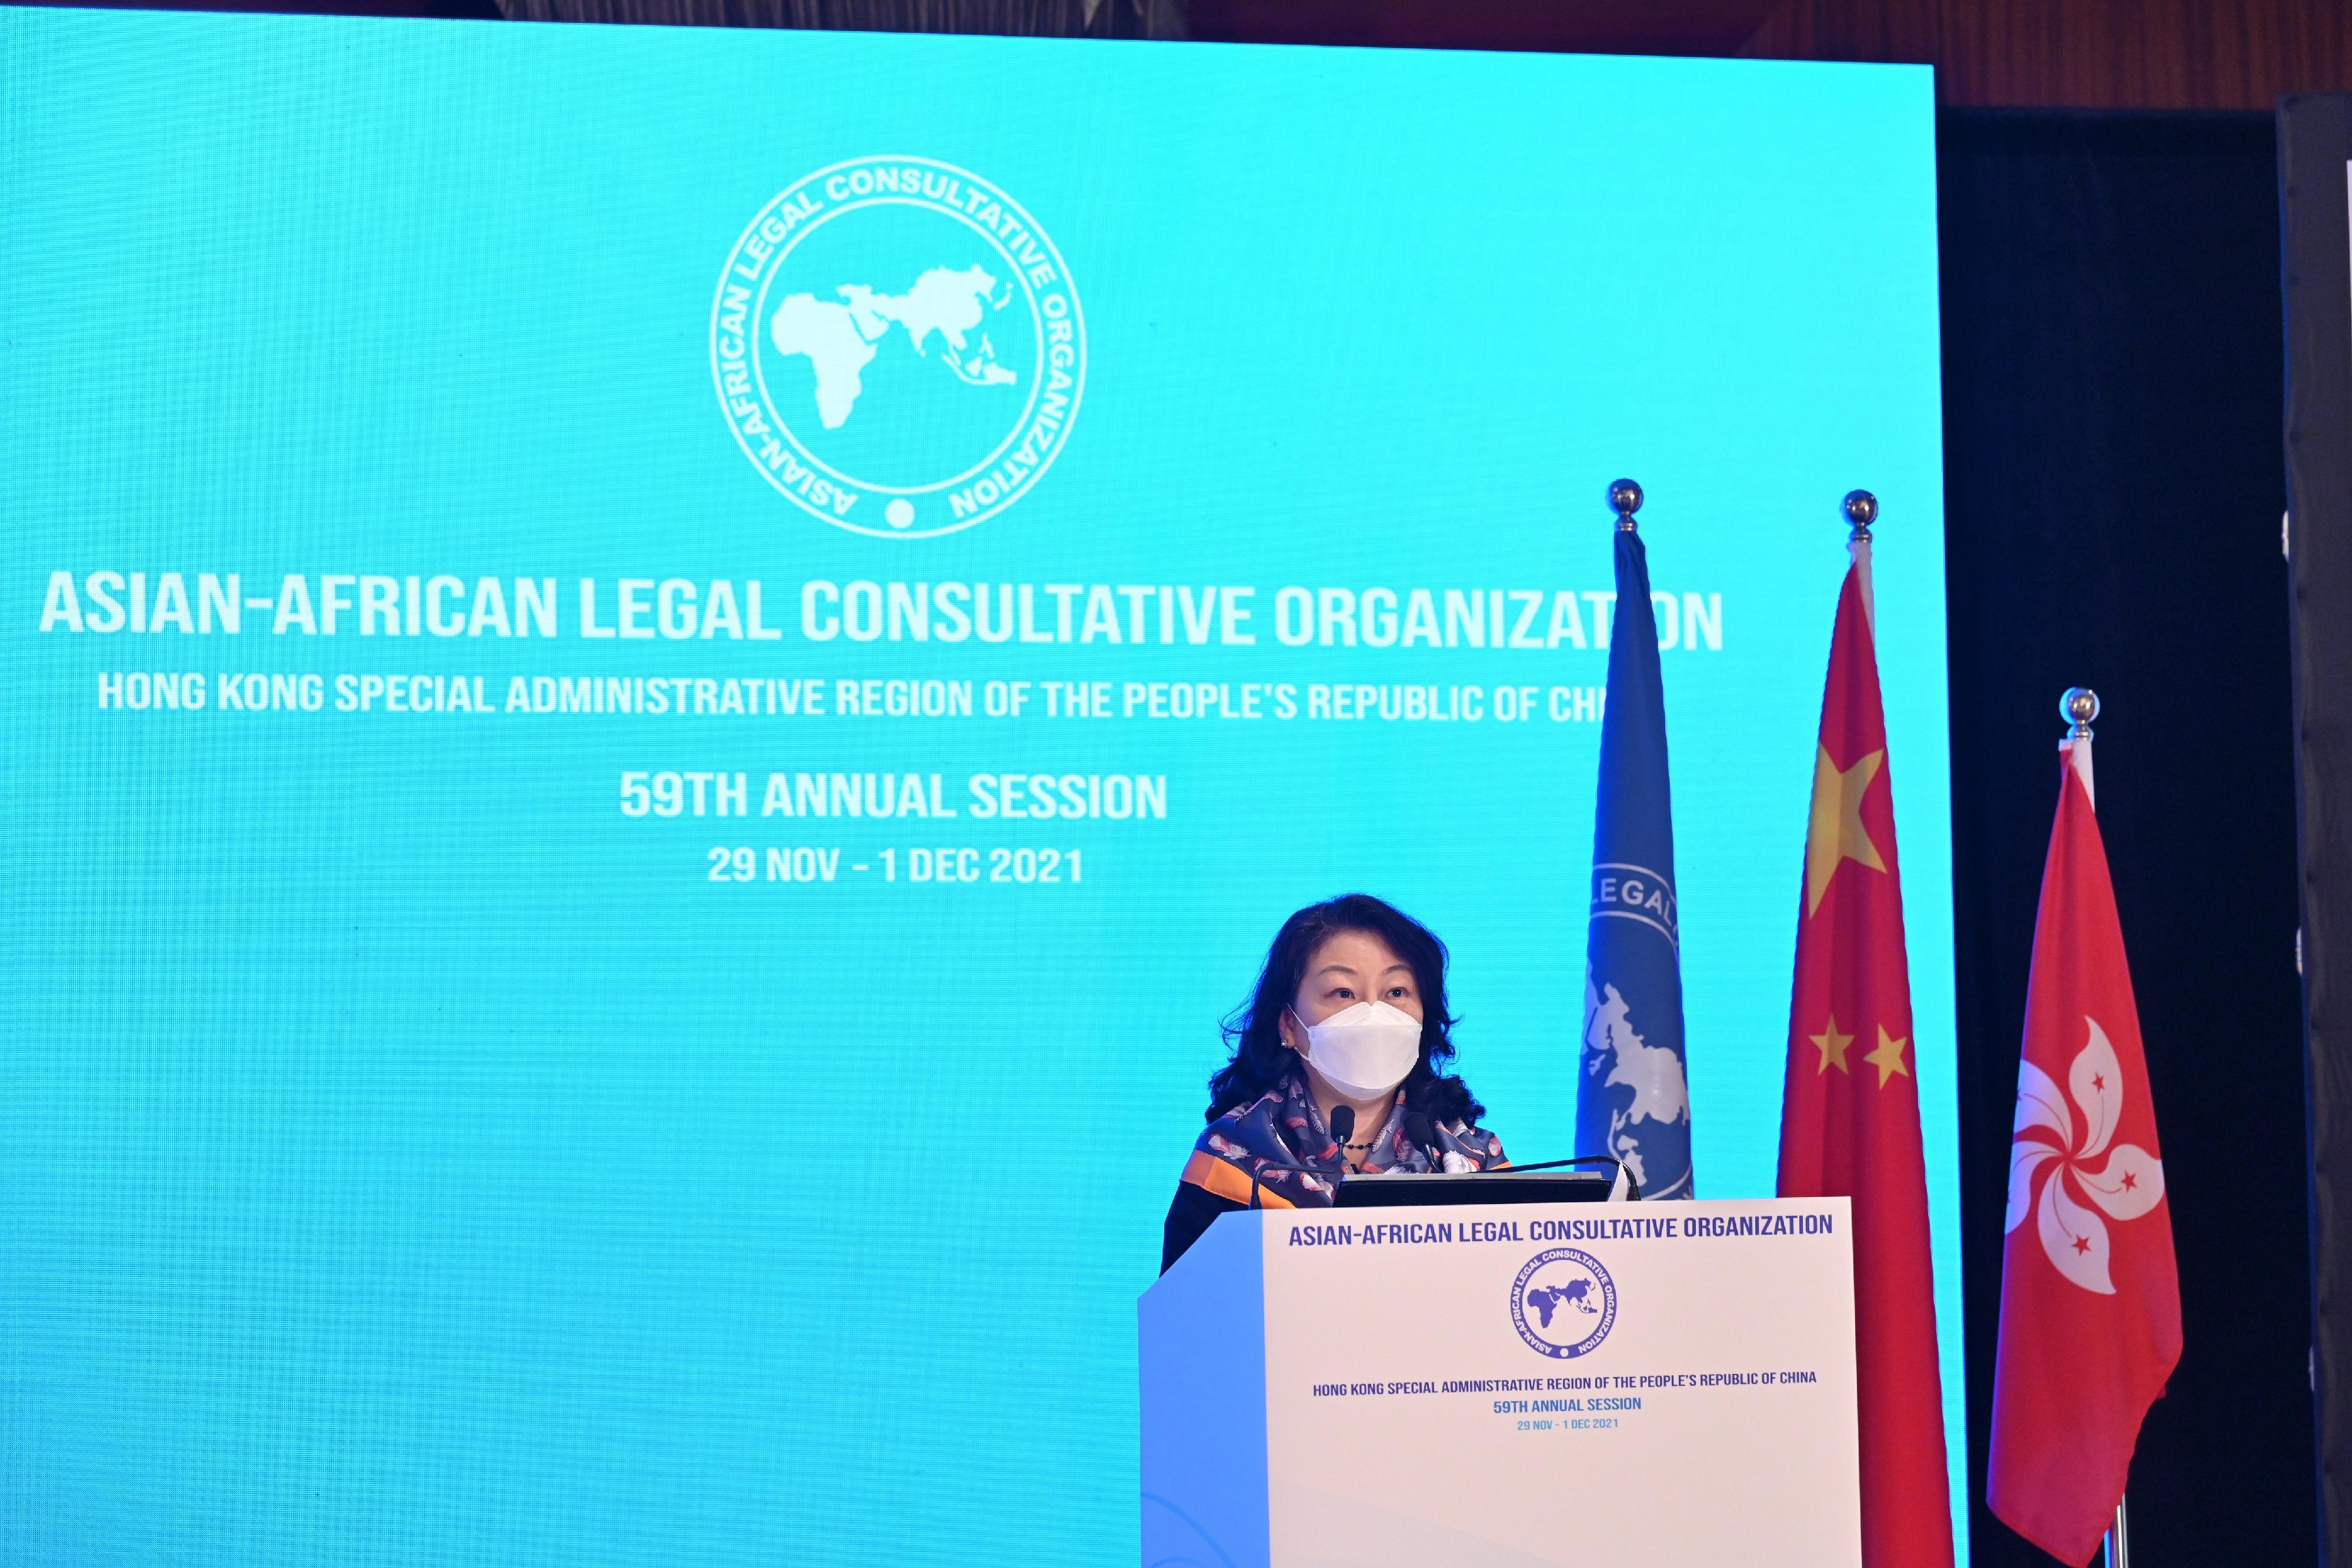 The Secretary for Justice, Ms Teresa Cheng, SC, speaks at the Side Event of the 59th Annual Session of the Asian-African Legal Consultative Organization "Dispute Settlement - Online Dispute Resolution" today (November 30).